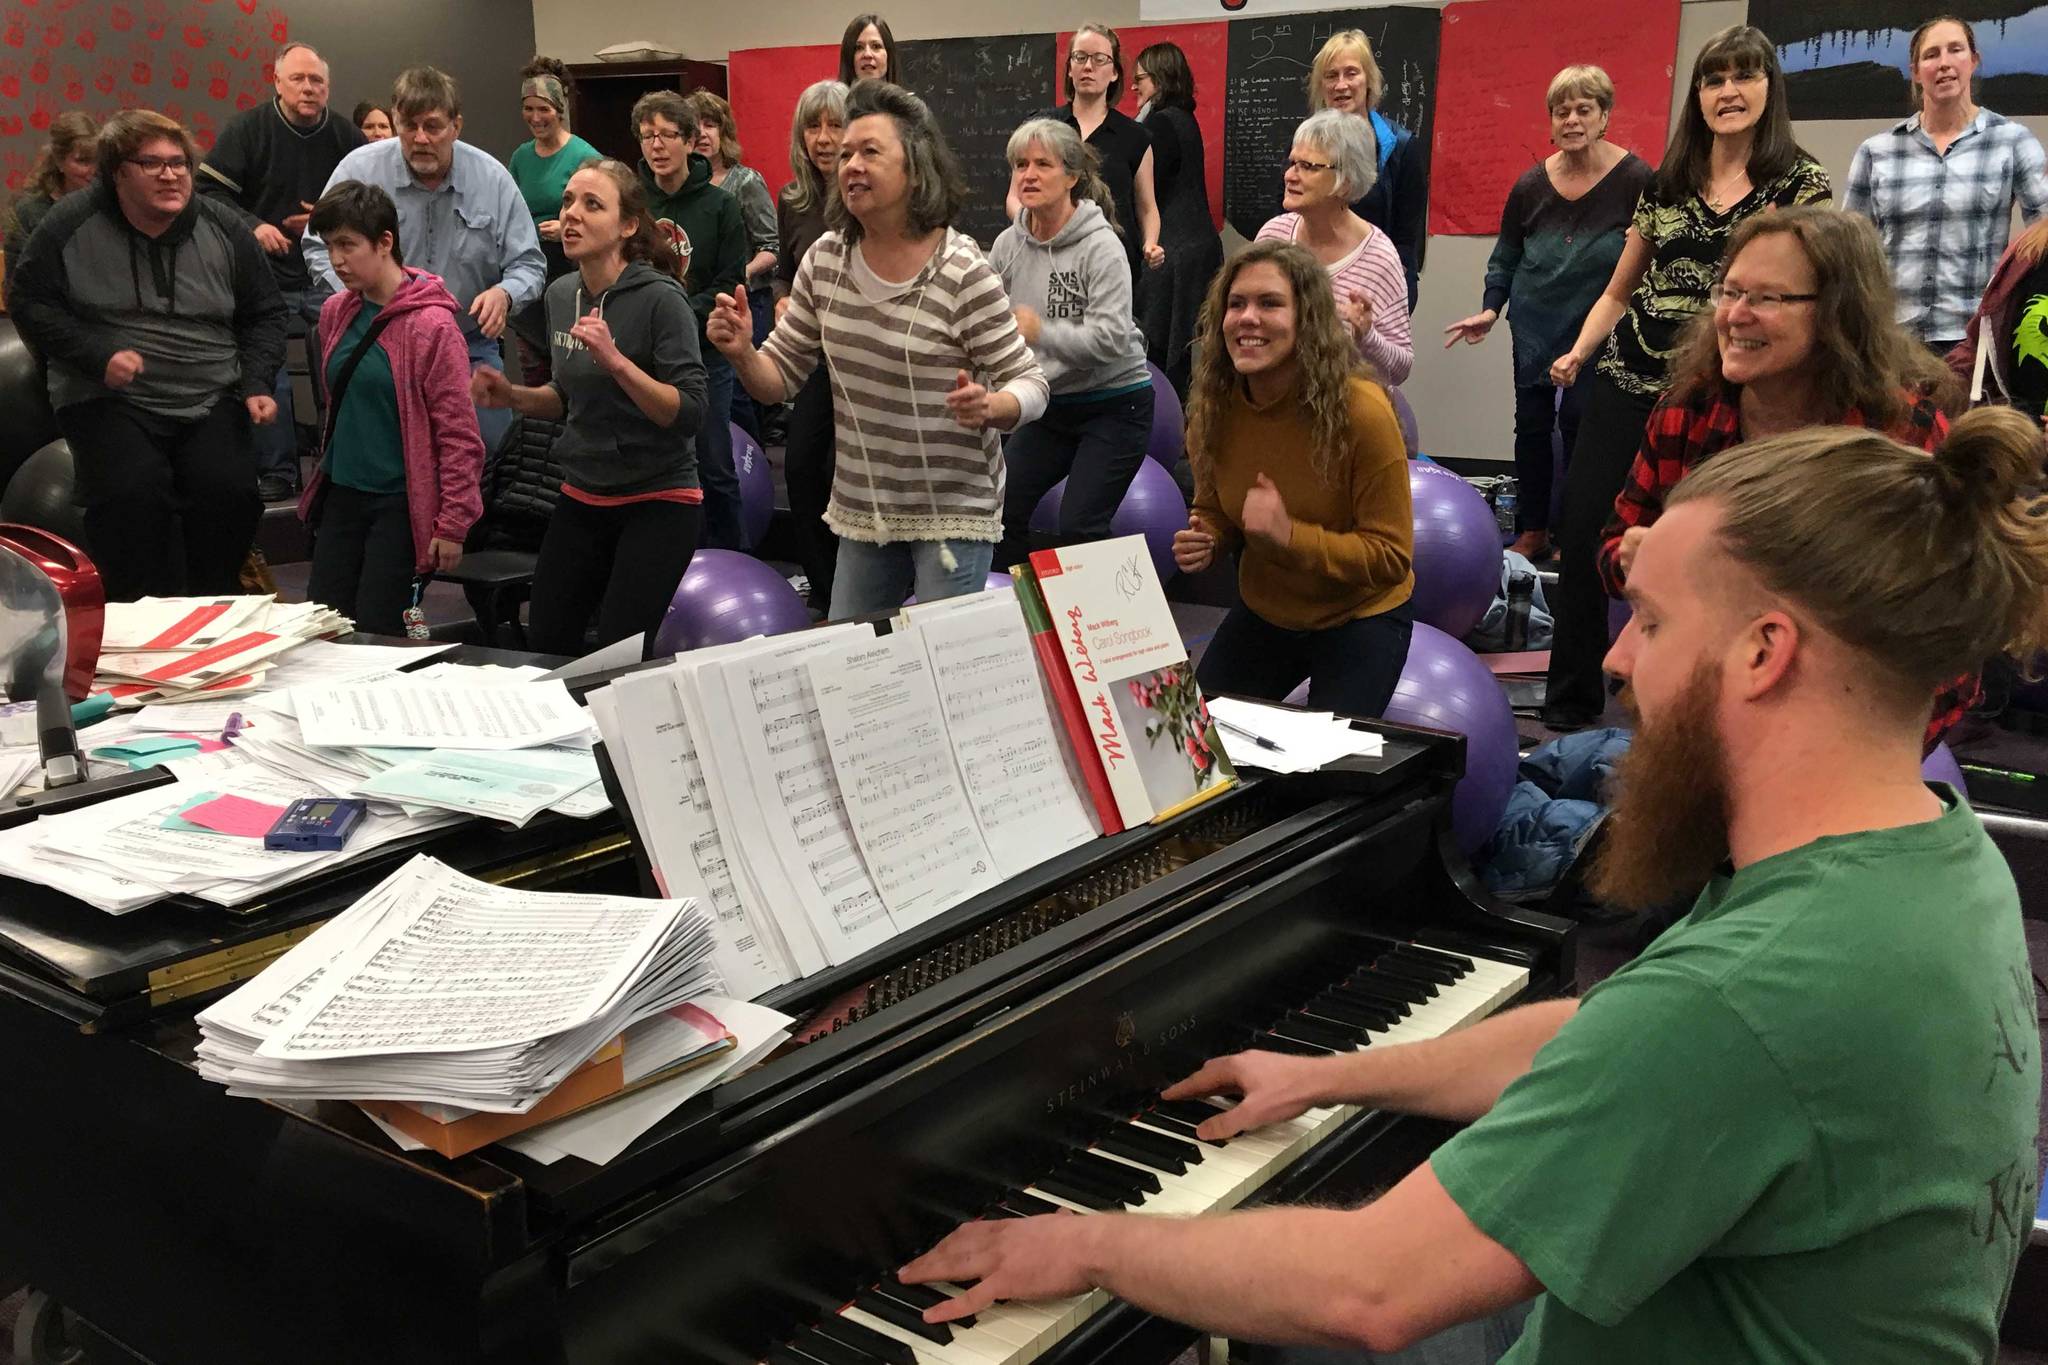 ‘Evening of Christmas’ concert continues to grow